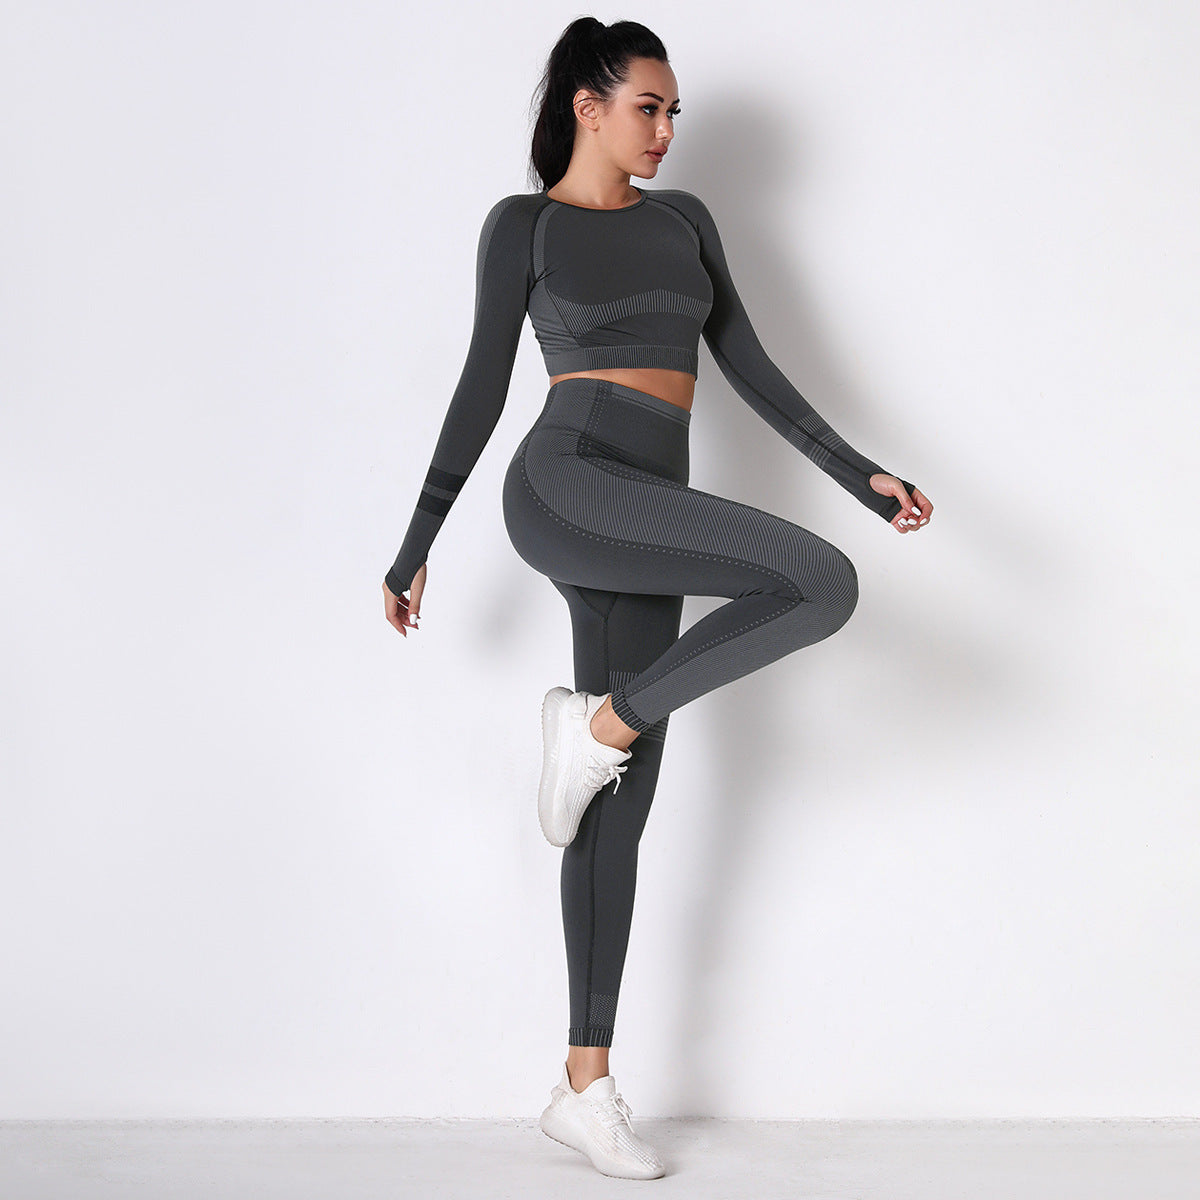 CHARCOAL SEAMLESS SPORT LONG SLEEVE CROP TOP AND LEGGIES SETS